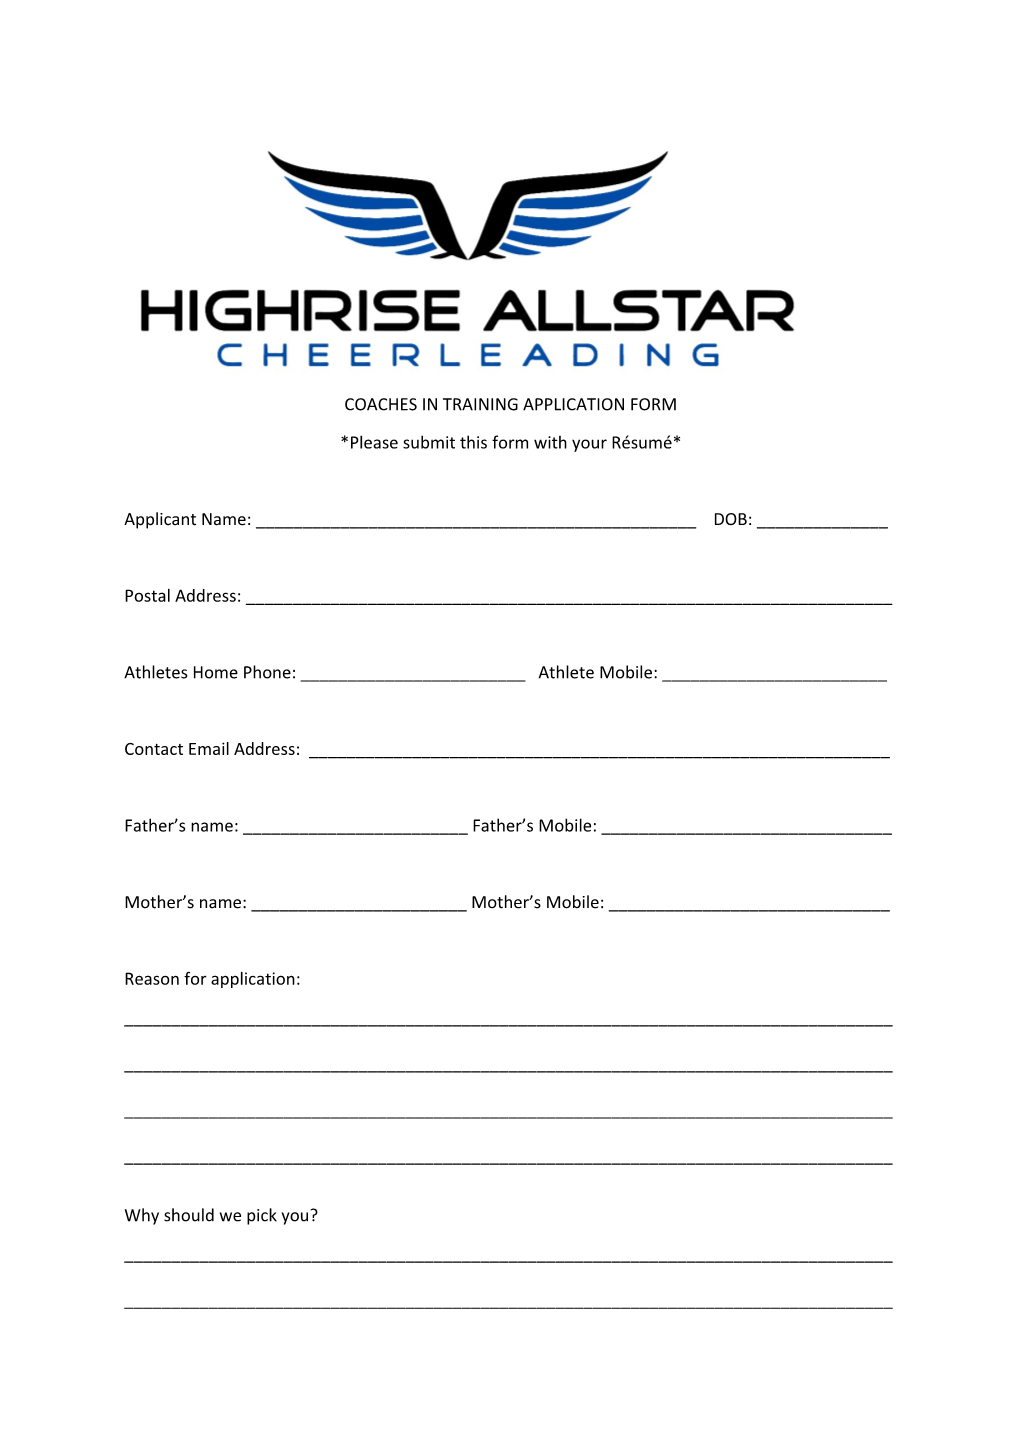 Coaches in Training Application Form